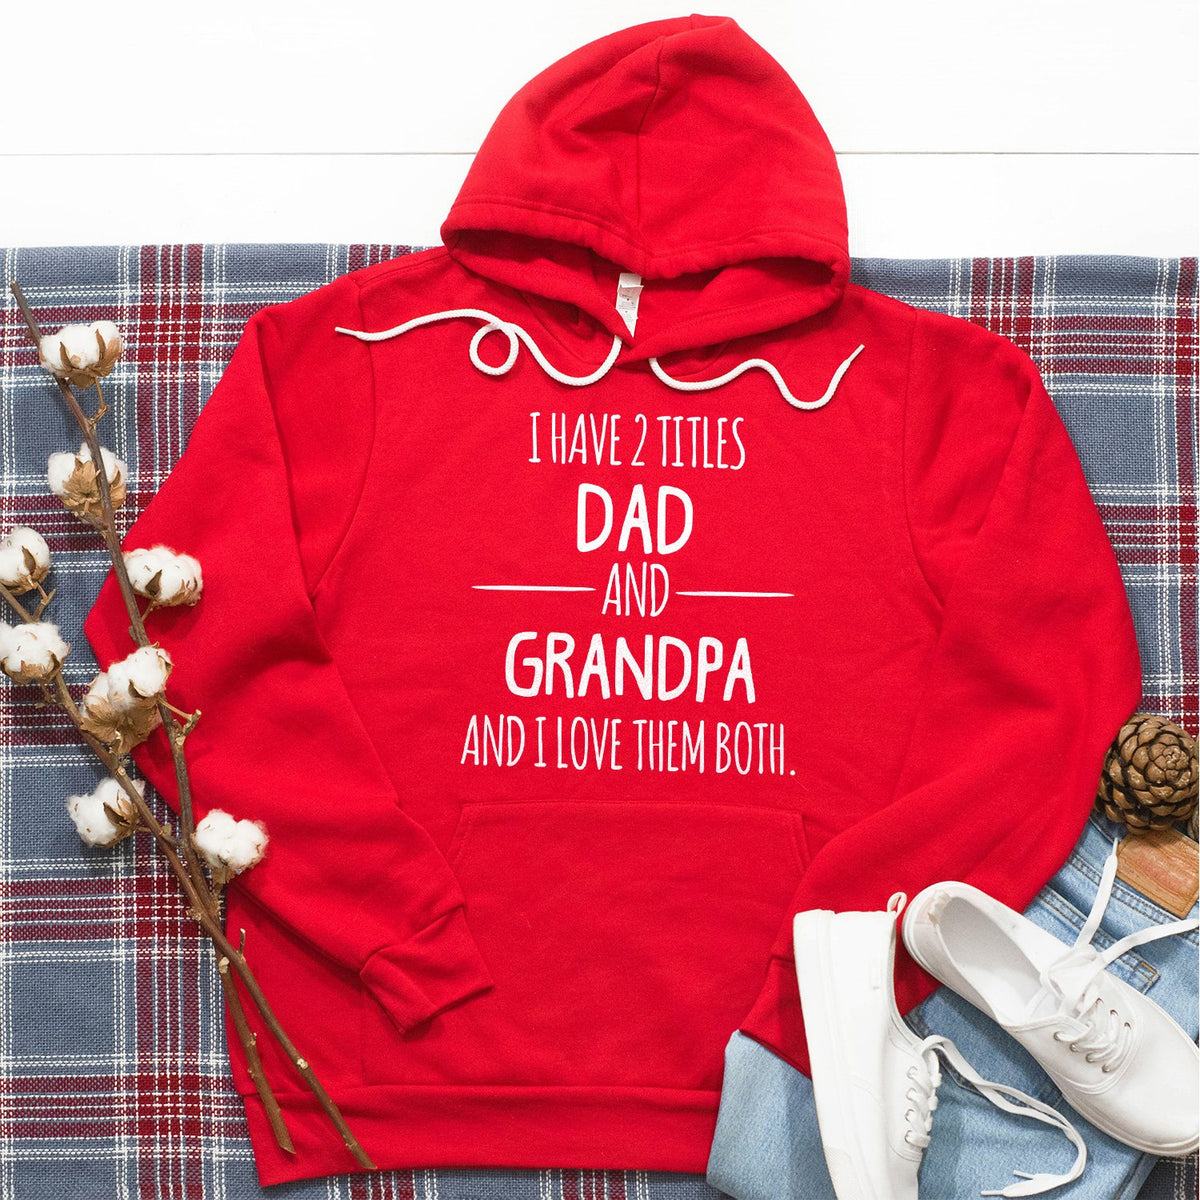 I Have 2 Titles Dad and Grandpa and I Love Them Both - Hoodie Sweatshirt